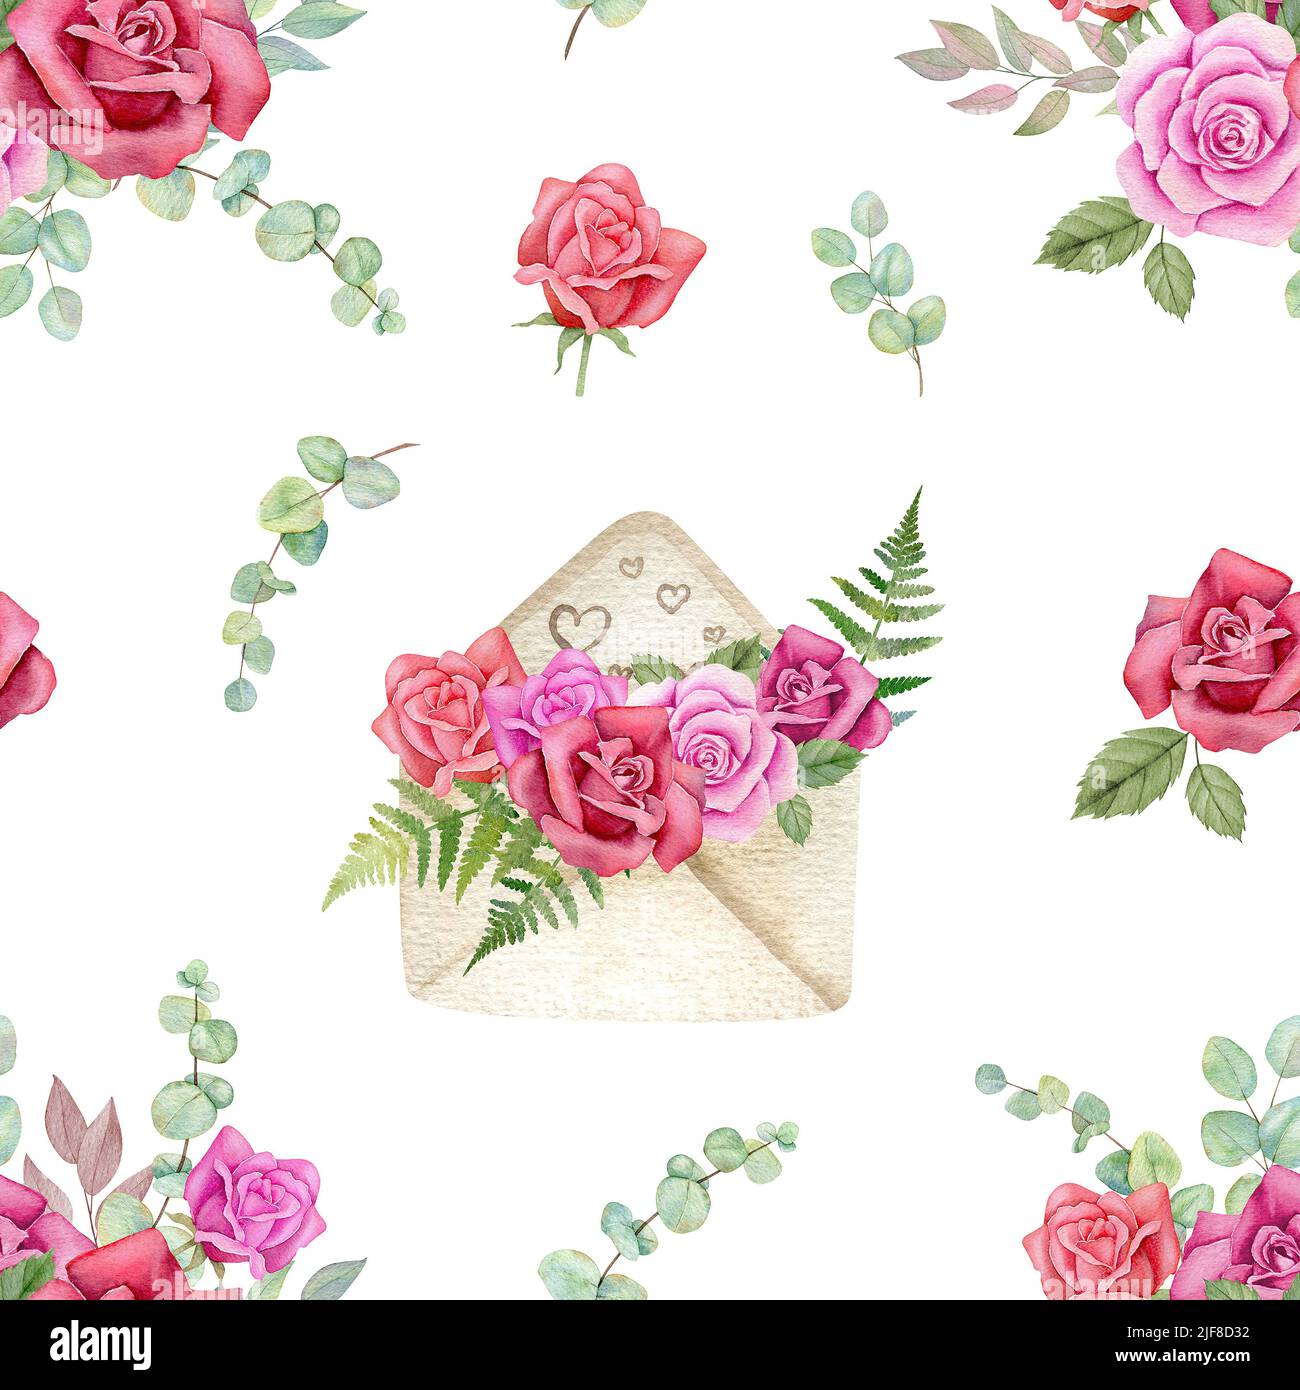 Wrapping Paper Flower Pattern Free Photo Download